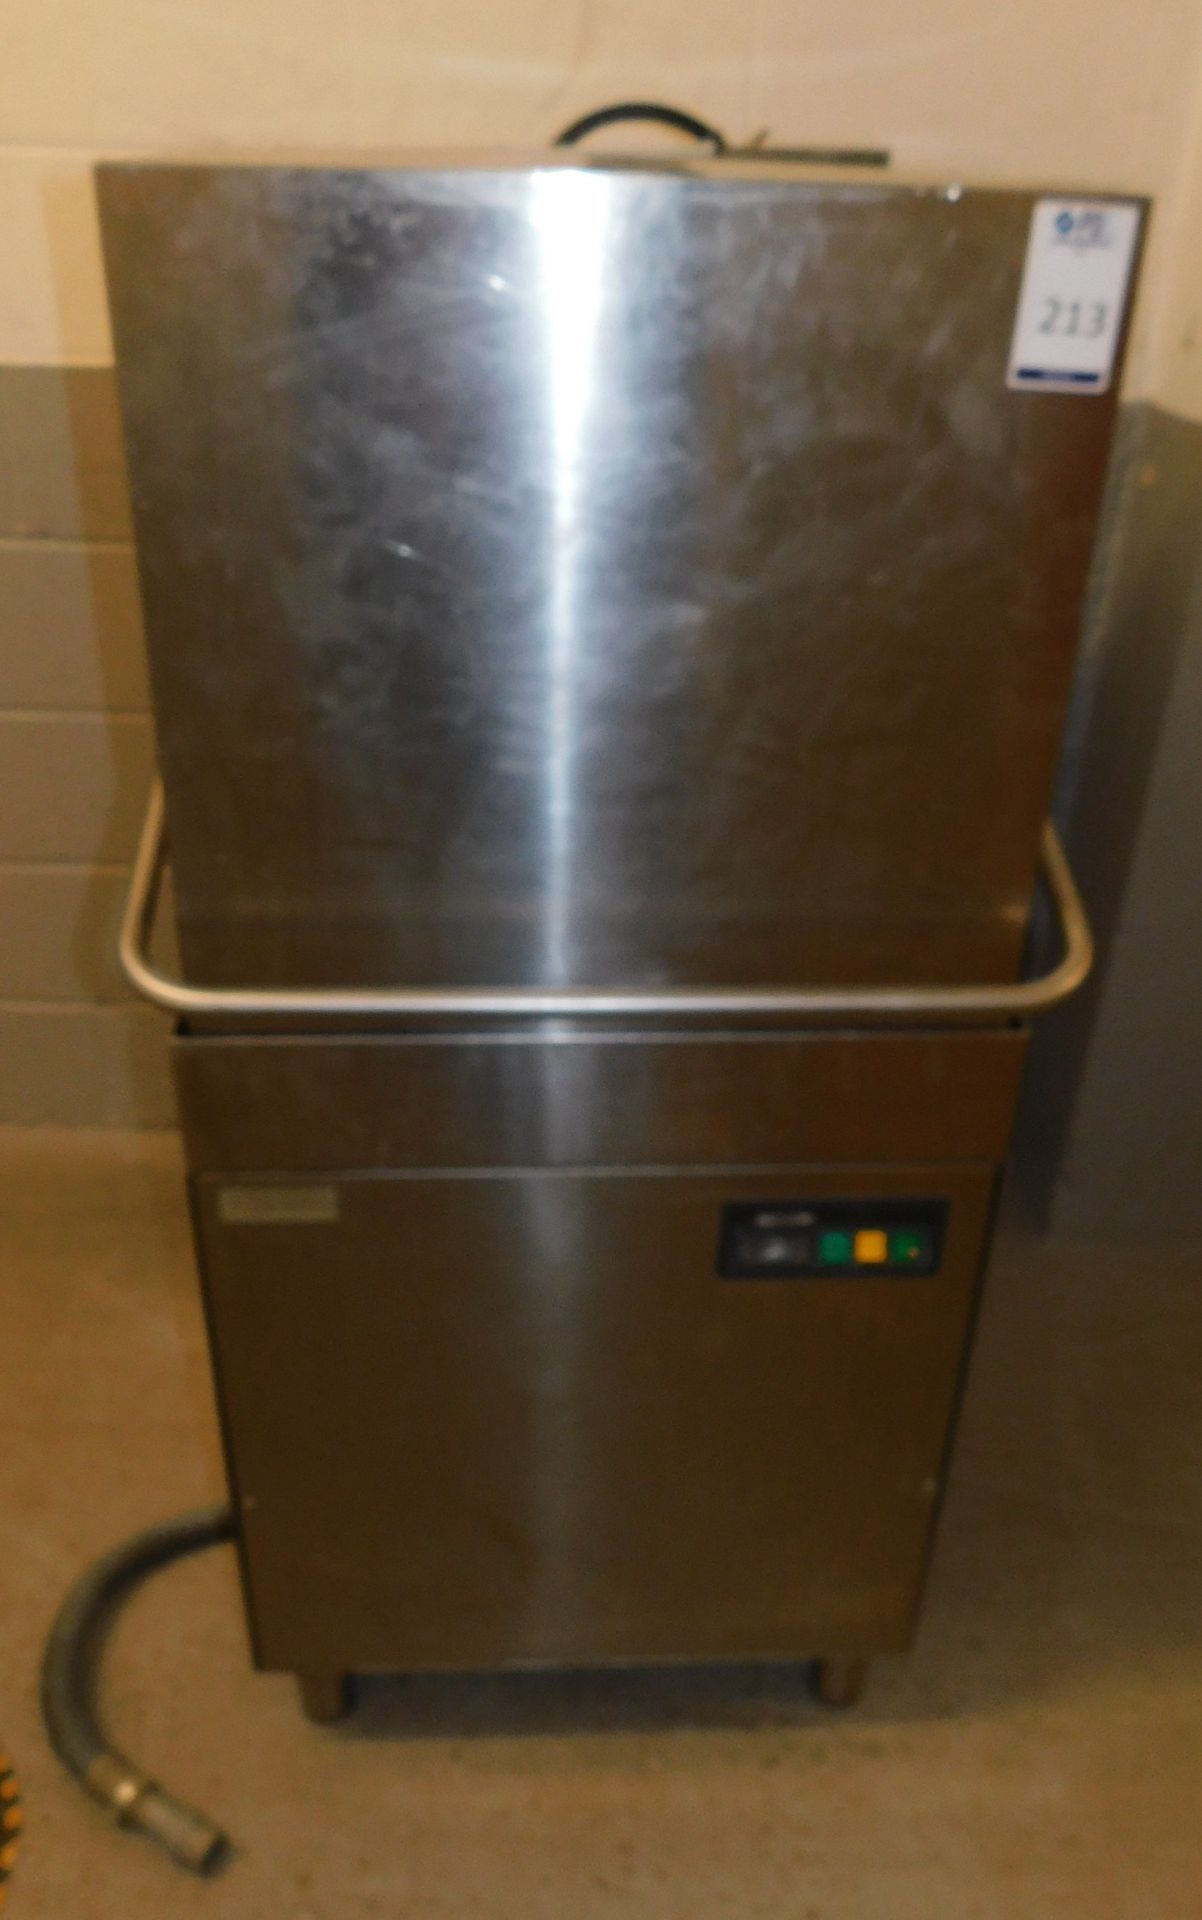 Romo Up and Over Stainless Steel Dishwasher (Location Stockport. Please See General Notes)